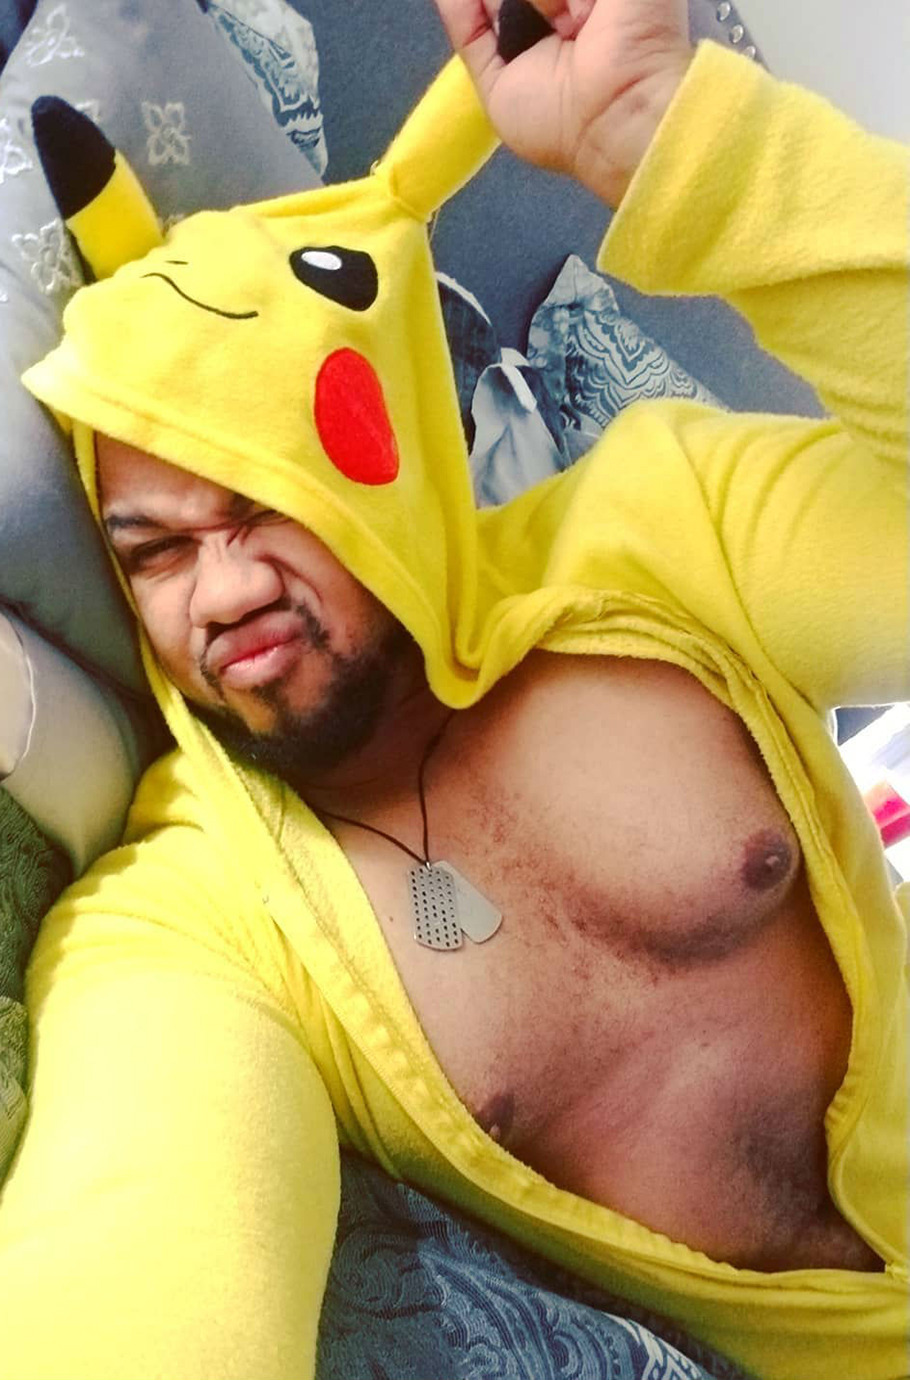 gaymerwitttattitude:  Gaymer Geek Selfies - Now this is my type of Sexy Thick Beefy